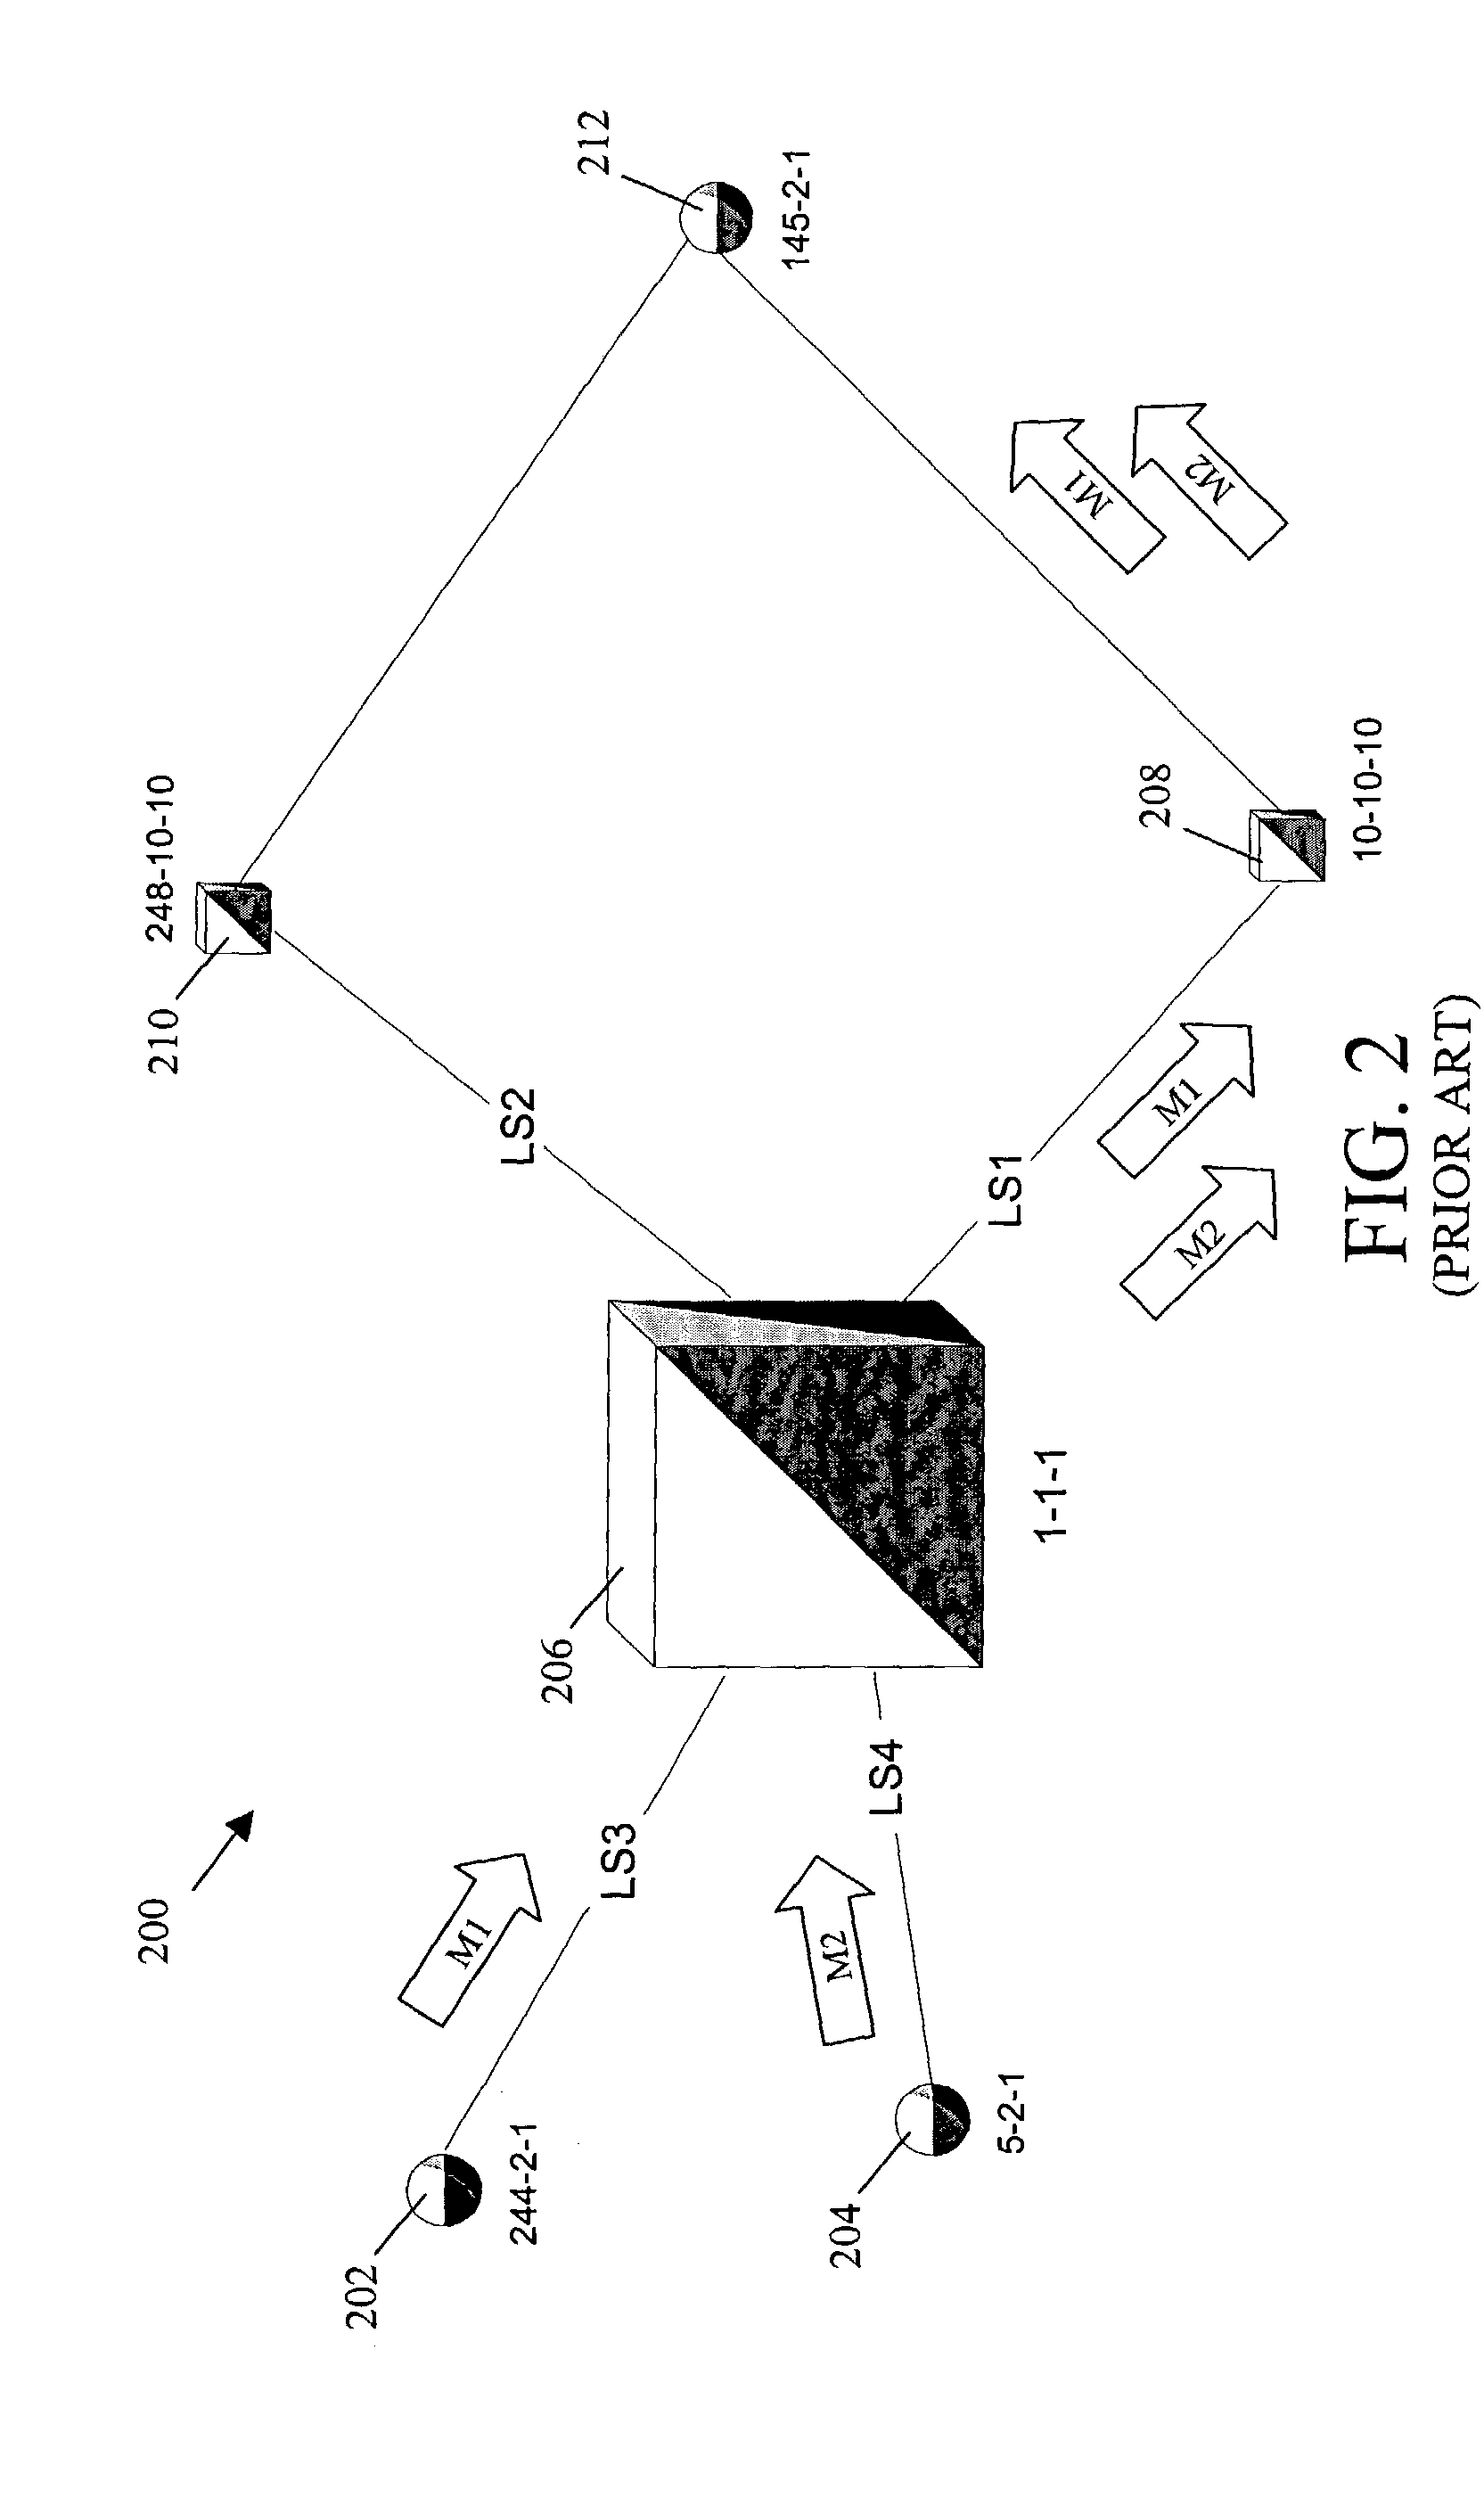 Methods and systems for routing signaling messages to the same destination over different routes using message origination information associated with non-adjacent signaling nodes